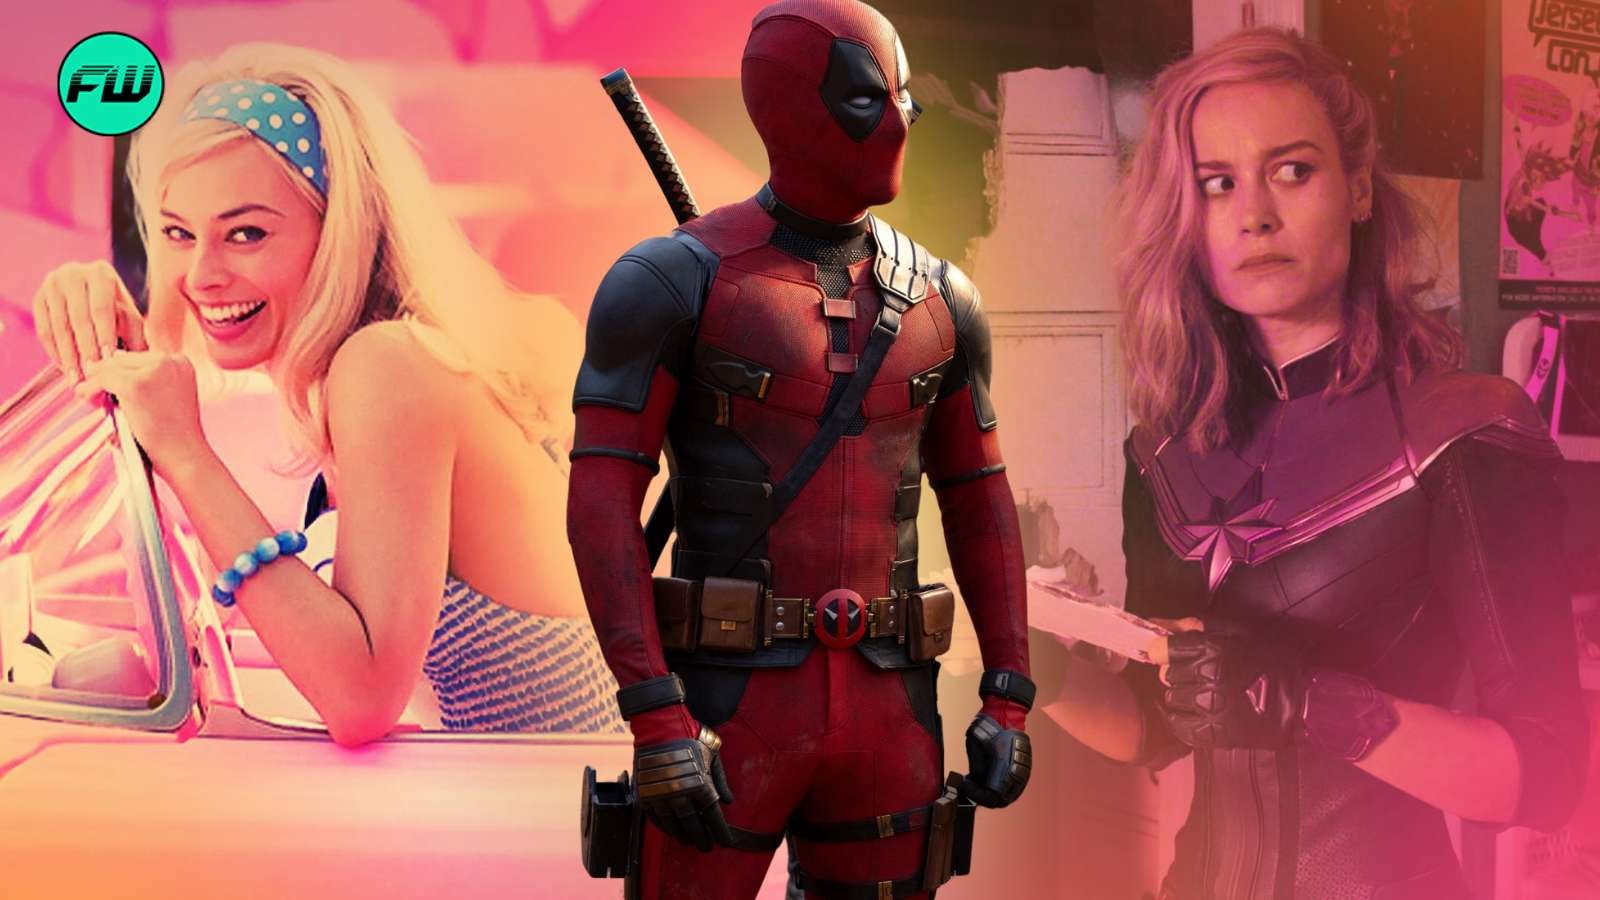 Deadpool, Brie Larson The Marvels and Margot Robbie Barbie